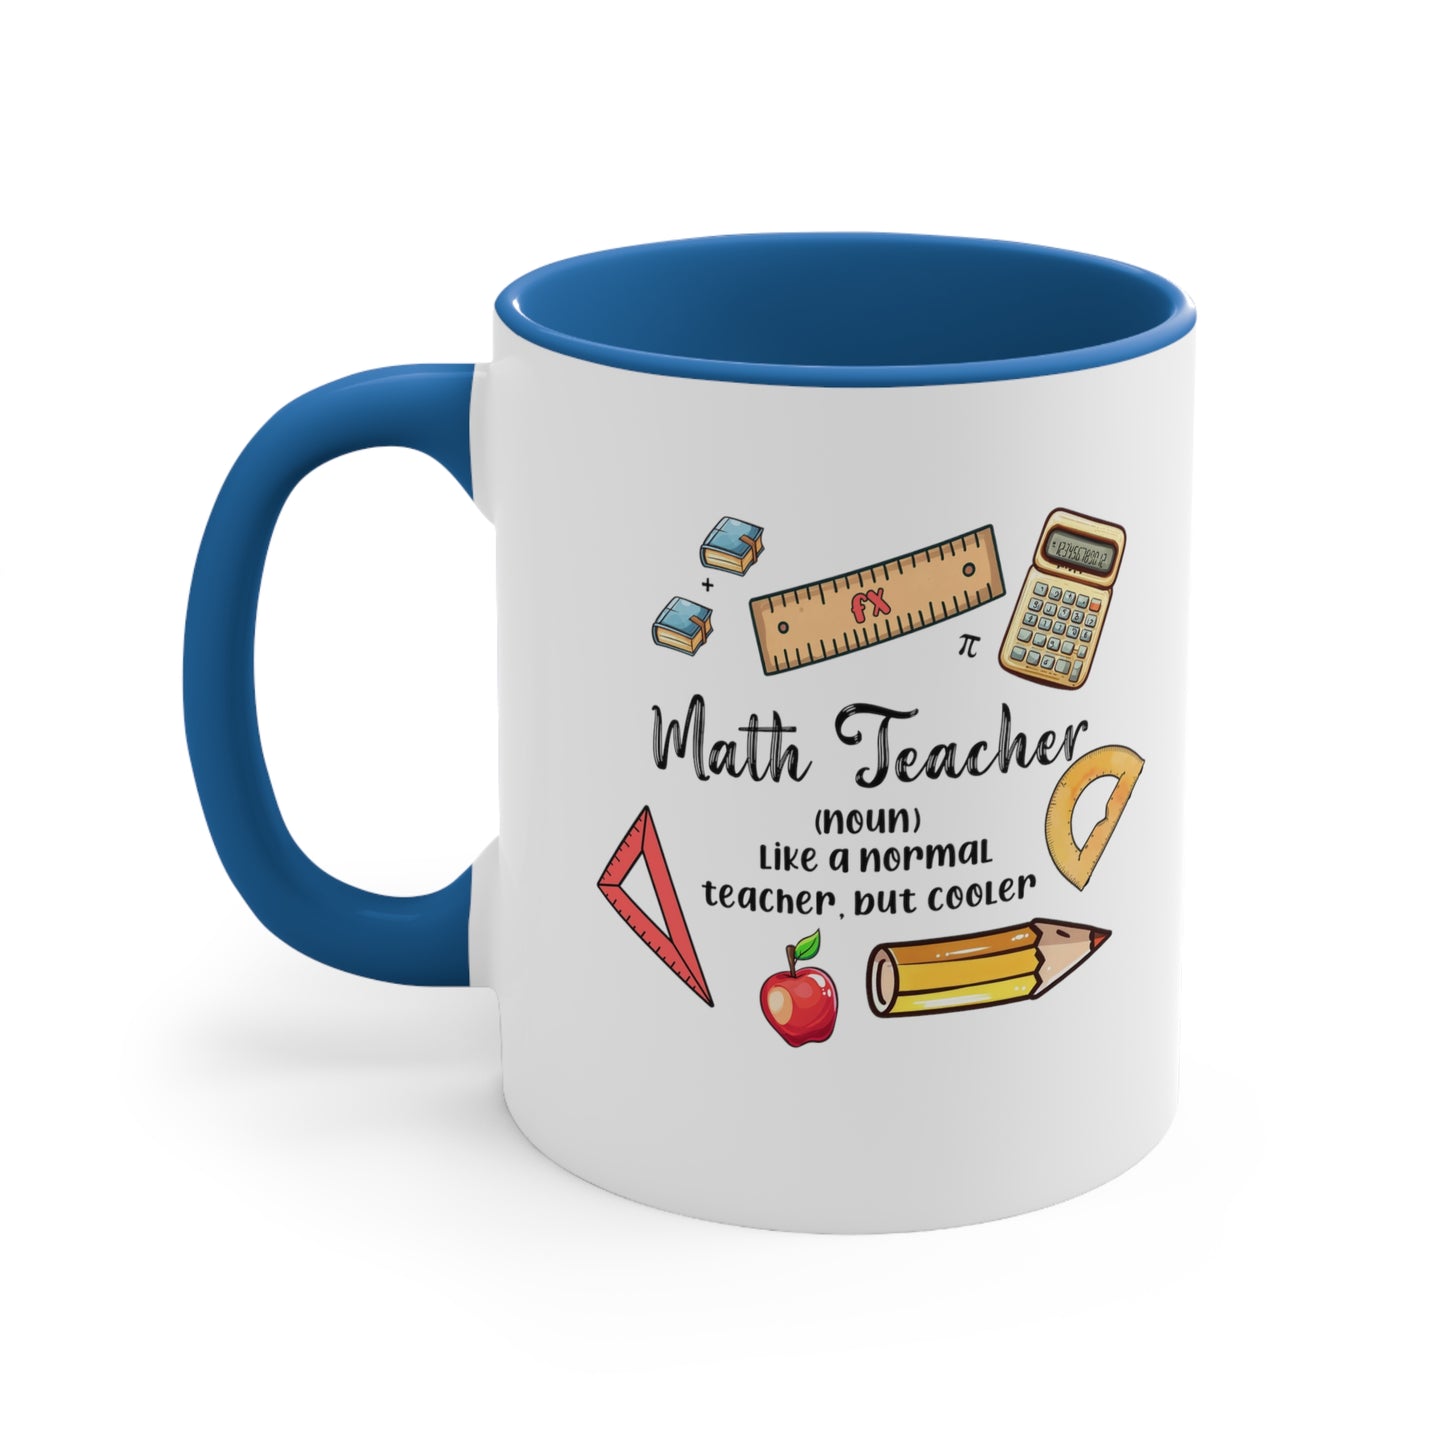 "Sip in Style: Unique 11oz Math Teacher Mug - Perfect Gift for Numbers Enthusiasts | Enhance Your Daily Brew with Mathematical Charm!", colour full mug 110z